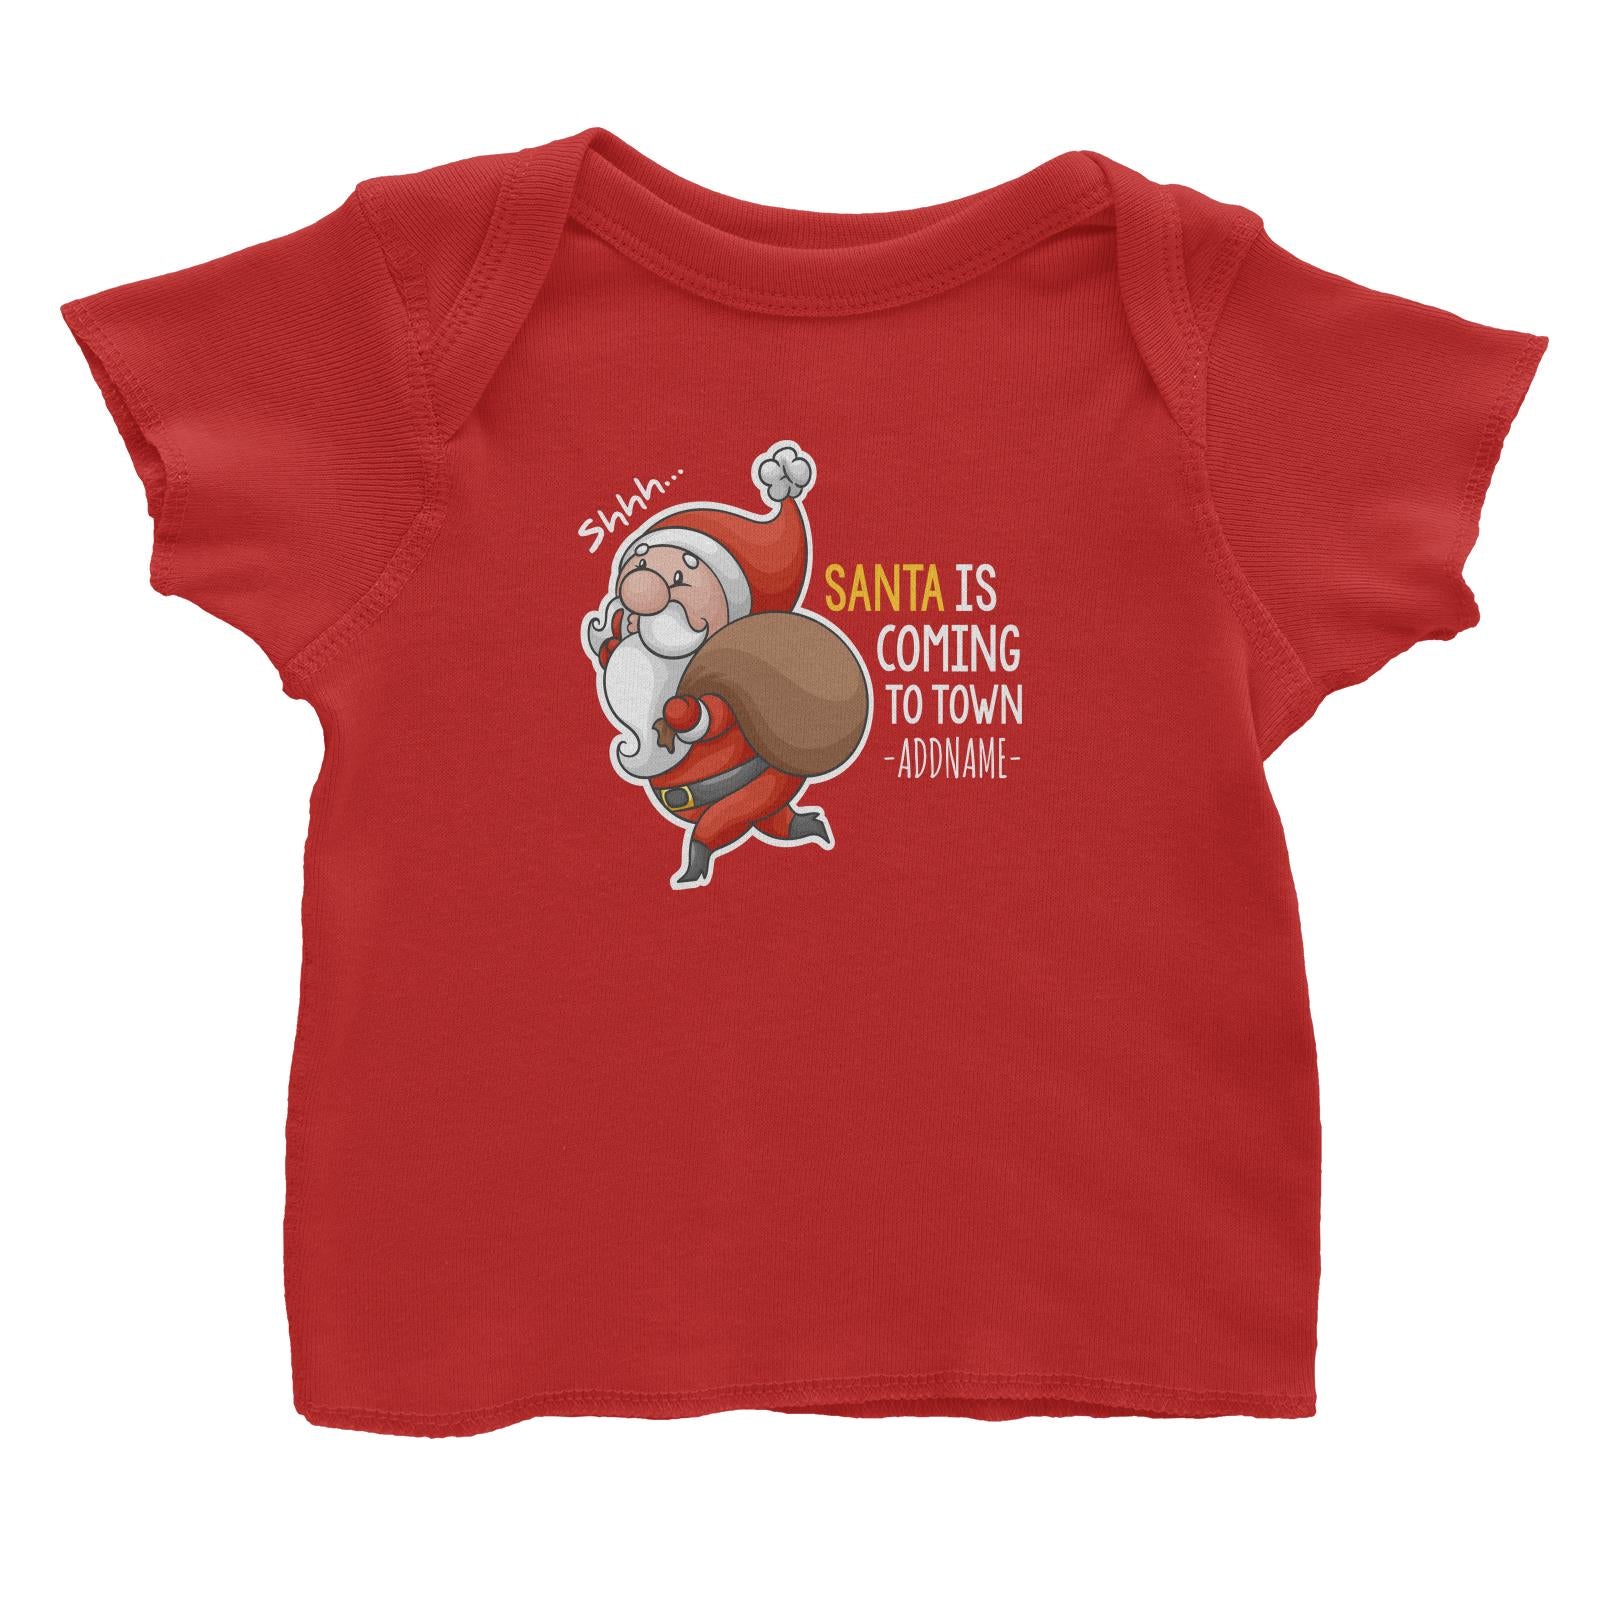 Santa Is Coming To Town Addname Baby T-Shirt Christmas Matching Family Personalizable Designs Cute